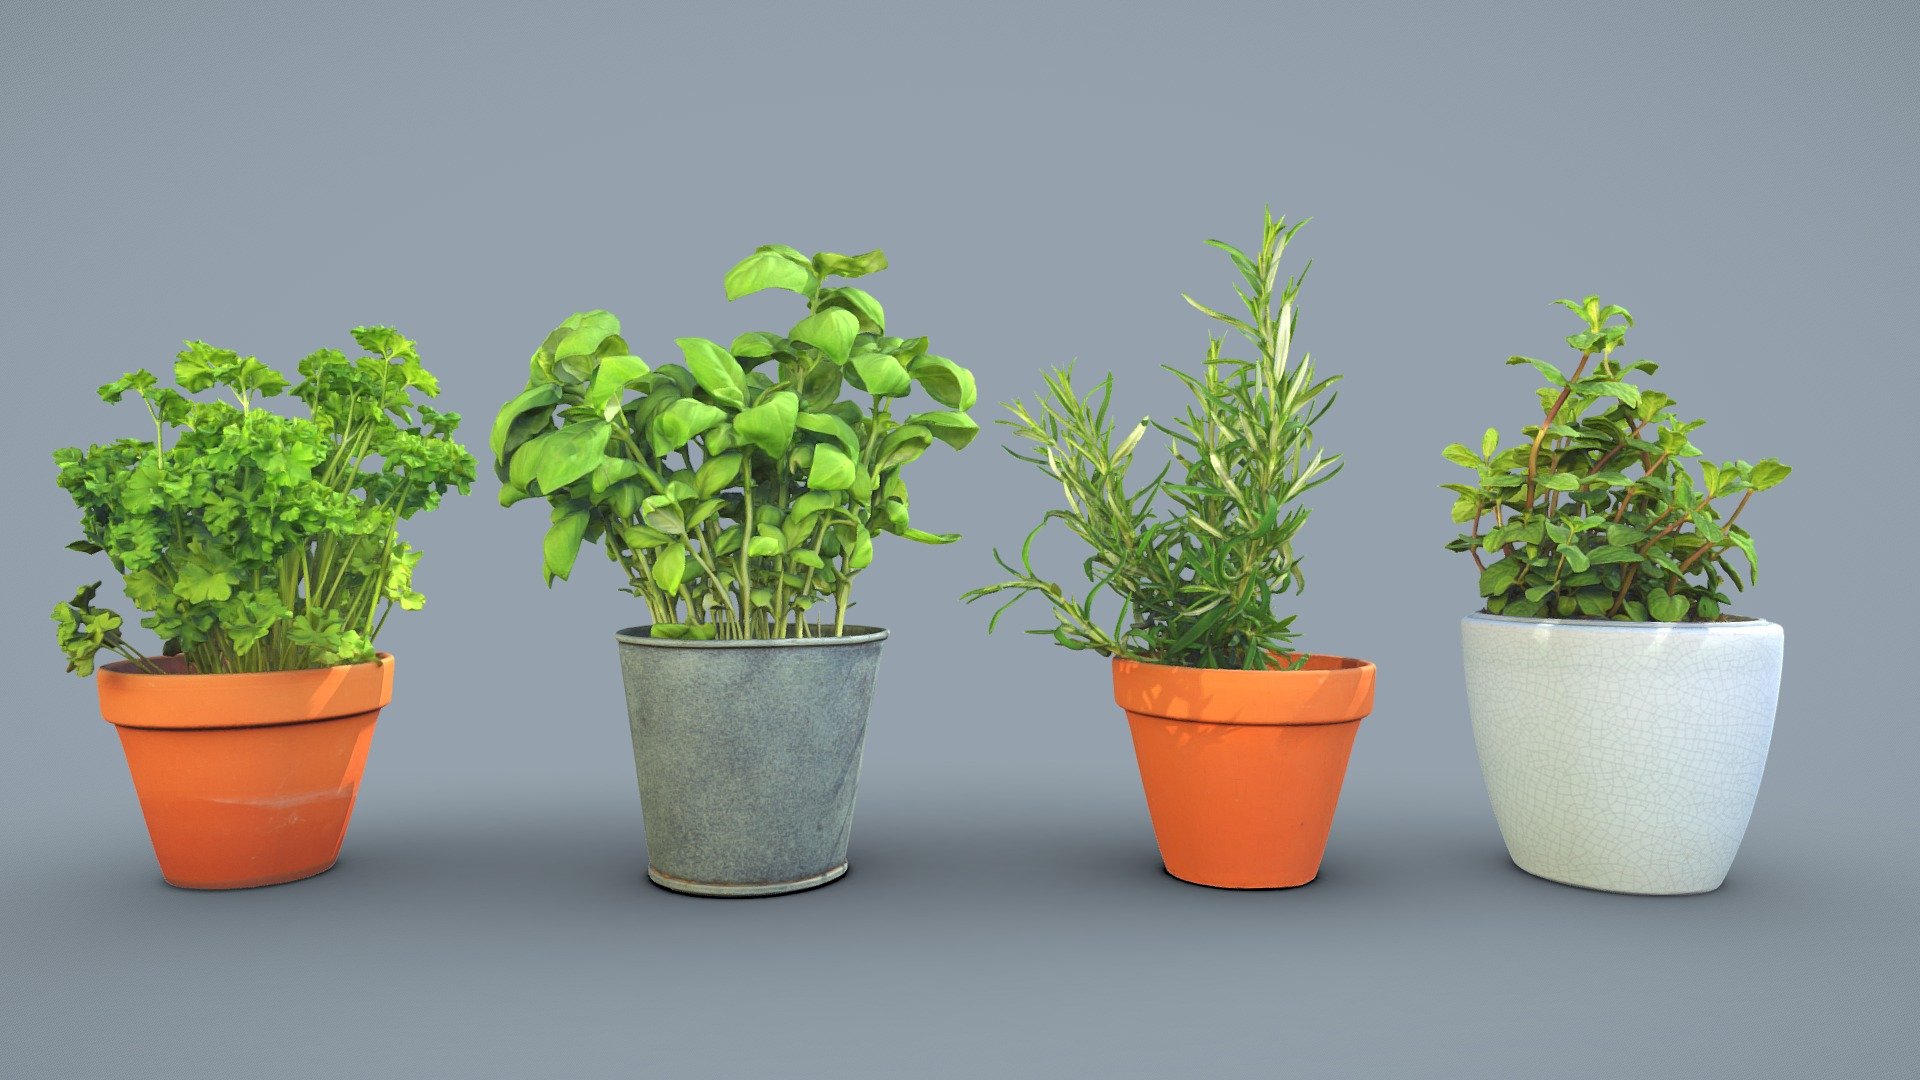 A pack of herbs that includes highpoly (about 950k) and lowpoly (about 50k) models of each plant. Pack includes:

Parsley  Highpoly version

Basil Highpoly version

Rosemary Highpoly version

Spearmint Highpoly version

All models include 8k diffuse map, 4k normal map, 4k ambient occlusion map and 4k subsurface map - Kitchen and garden herbs pack - Buy Royalty Free 3D model by Lassi Kaukonen (@thesidekick) 3d model